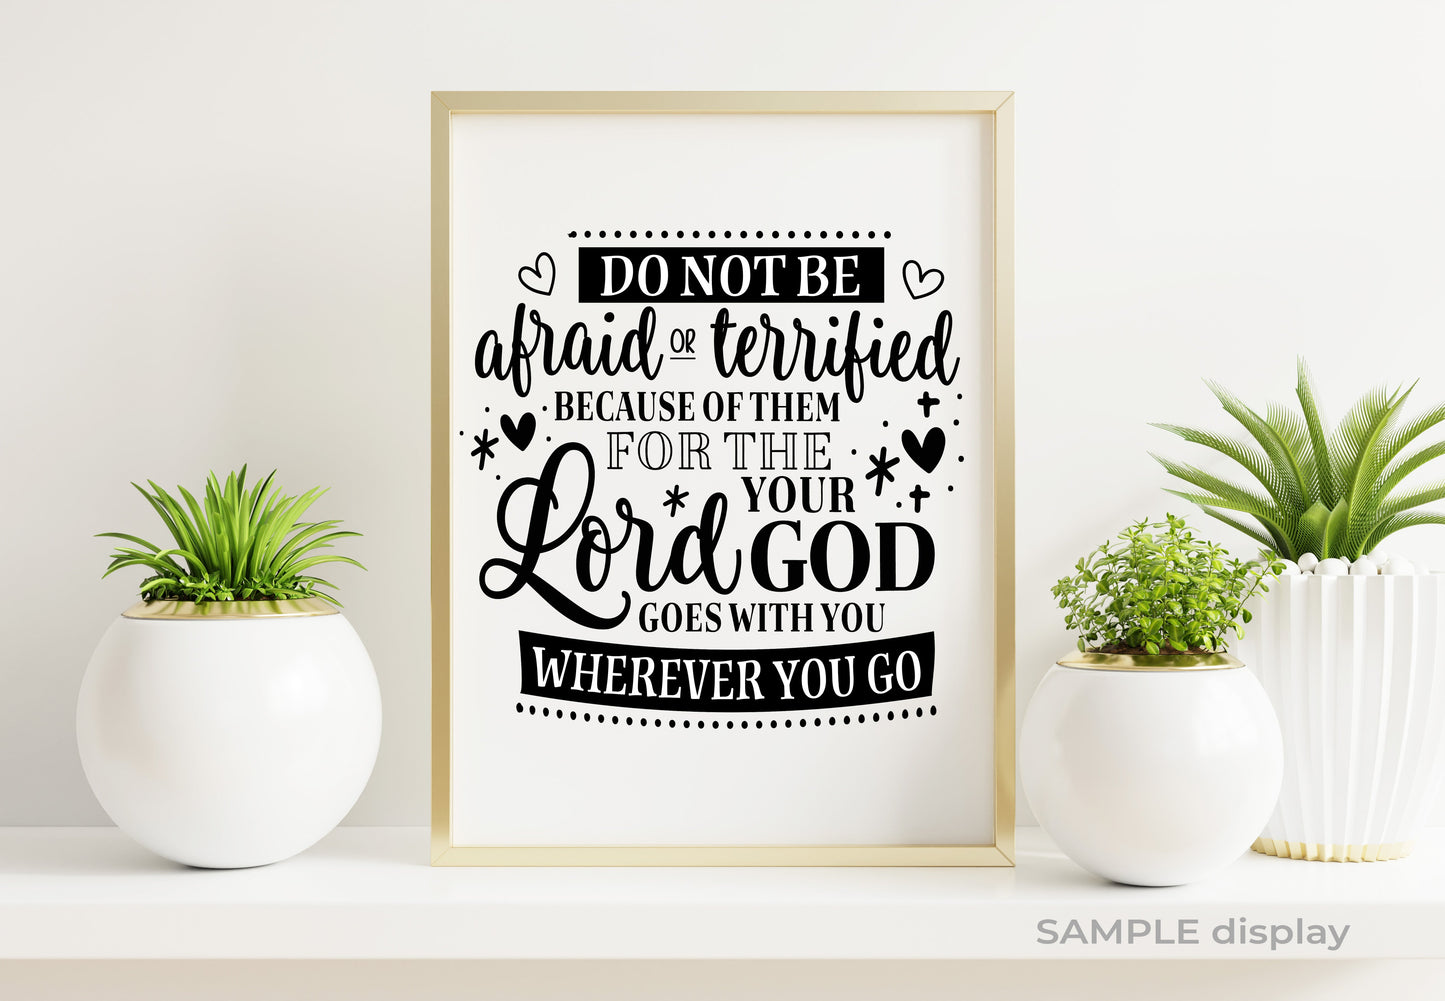 Goes With You Bible Verse Word Art.